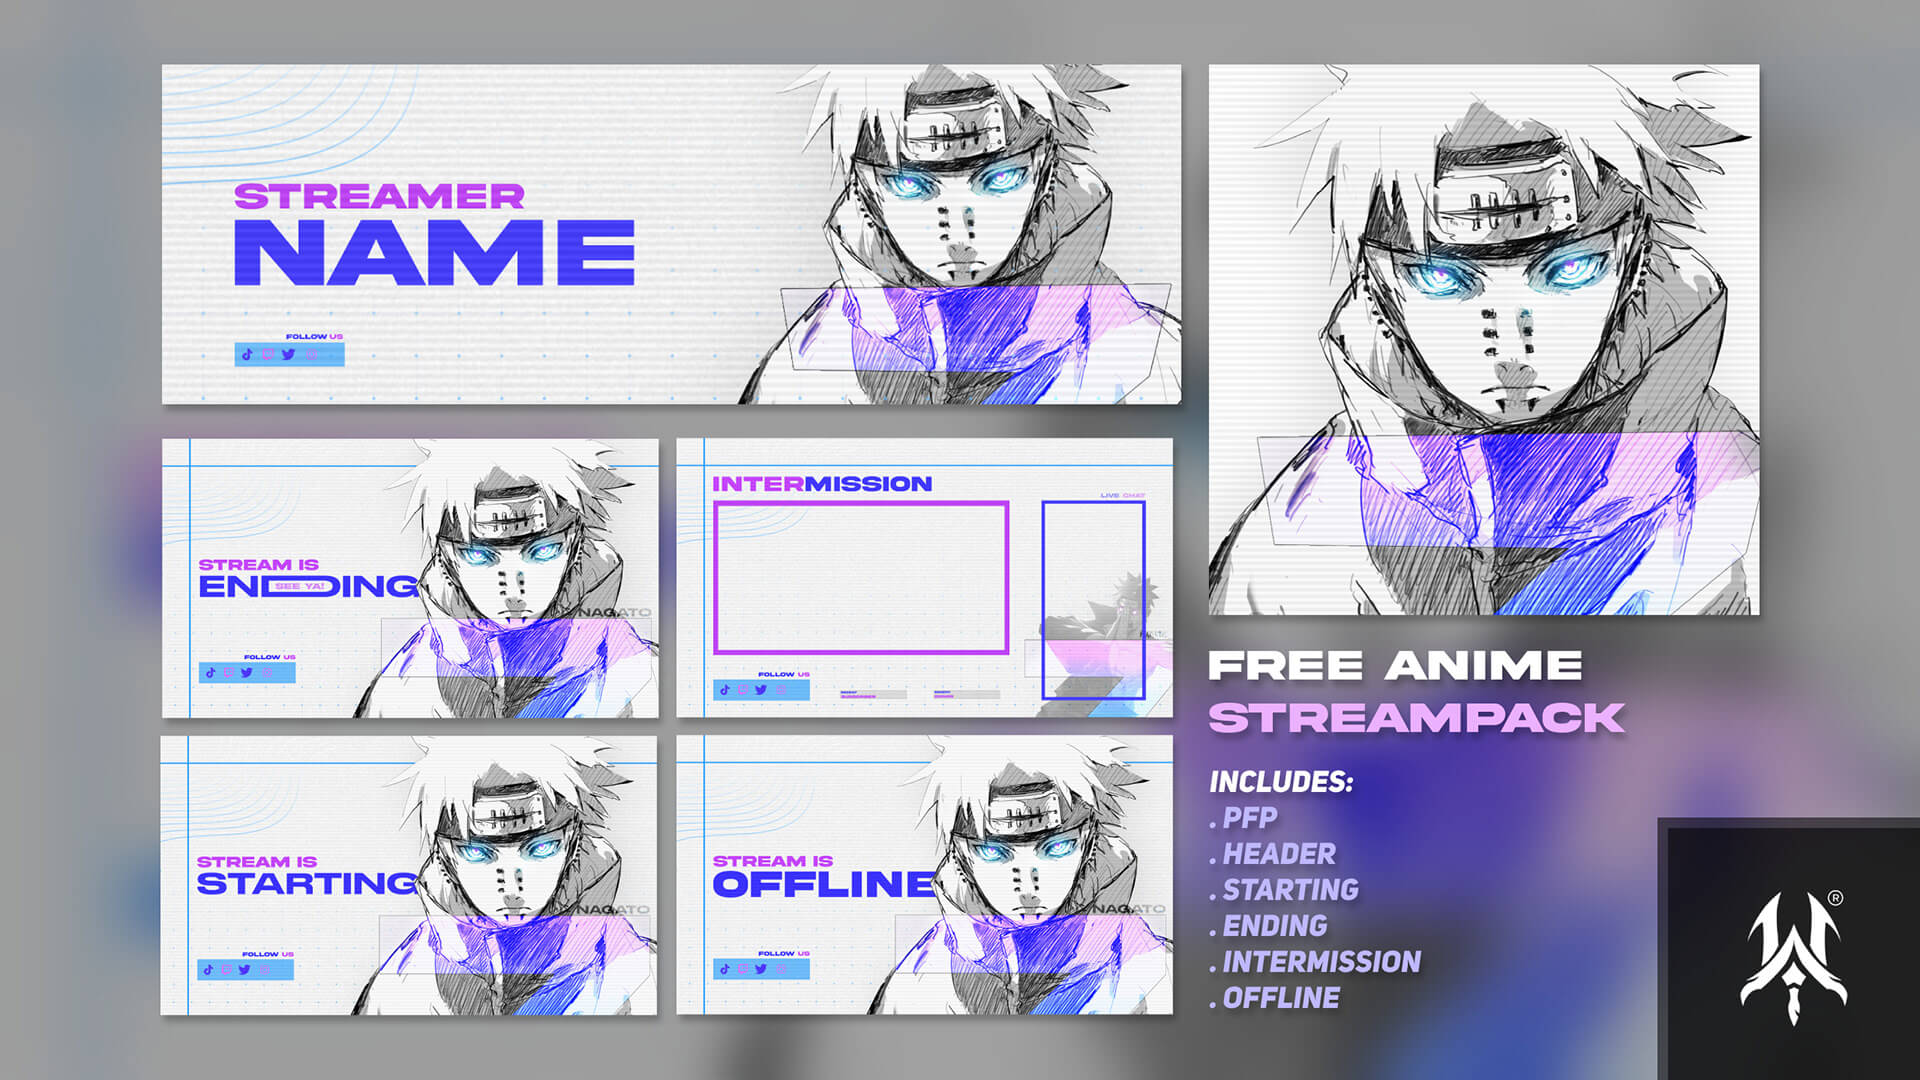 Sneakys Stream OverlaysPanelsAvatars Closed  forum  osu  Overlays  Background for powerpoint presentation Anime character drawing